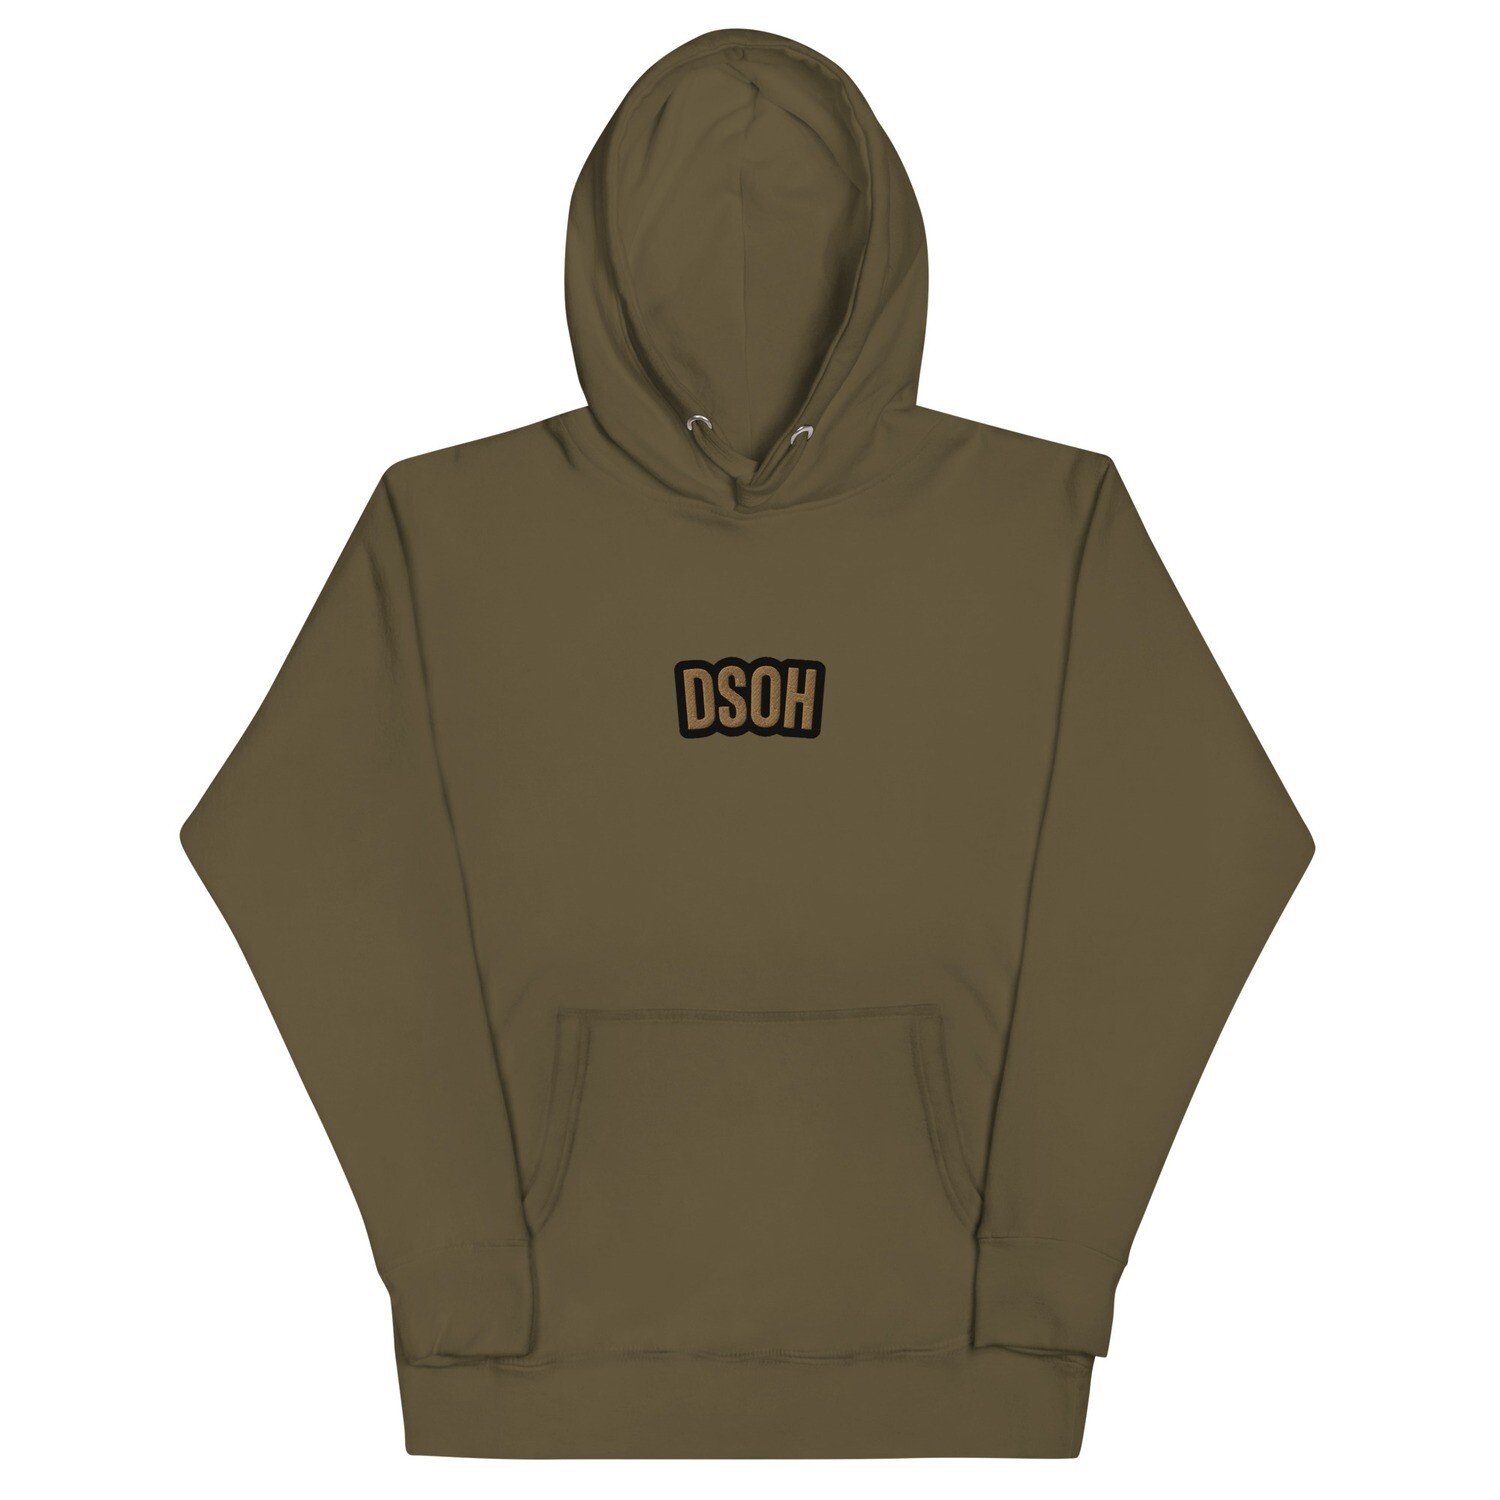 EMBROIDERED LOGO HOODIE by DSOH